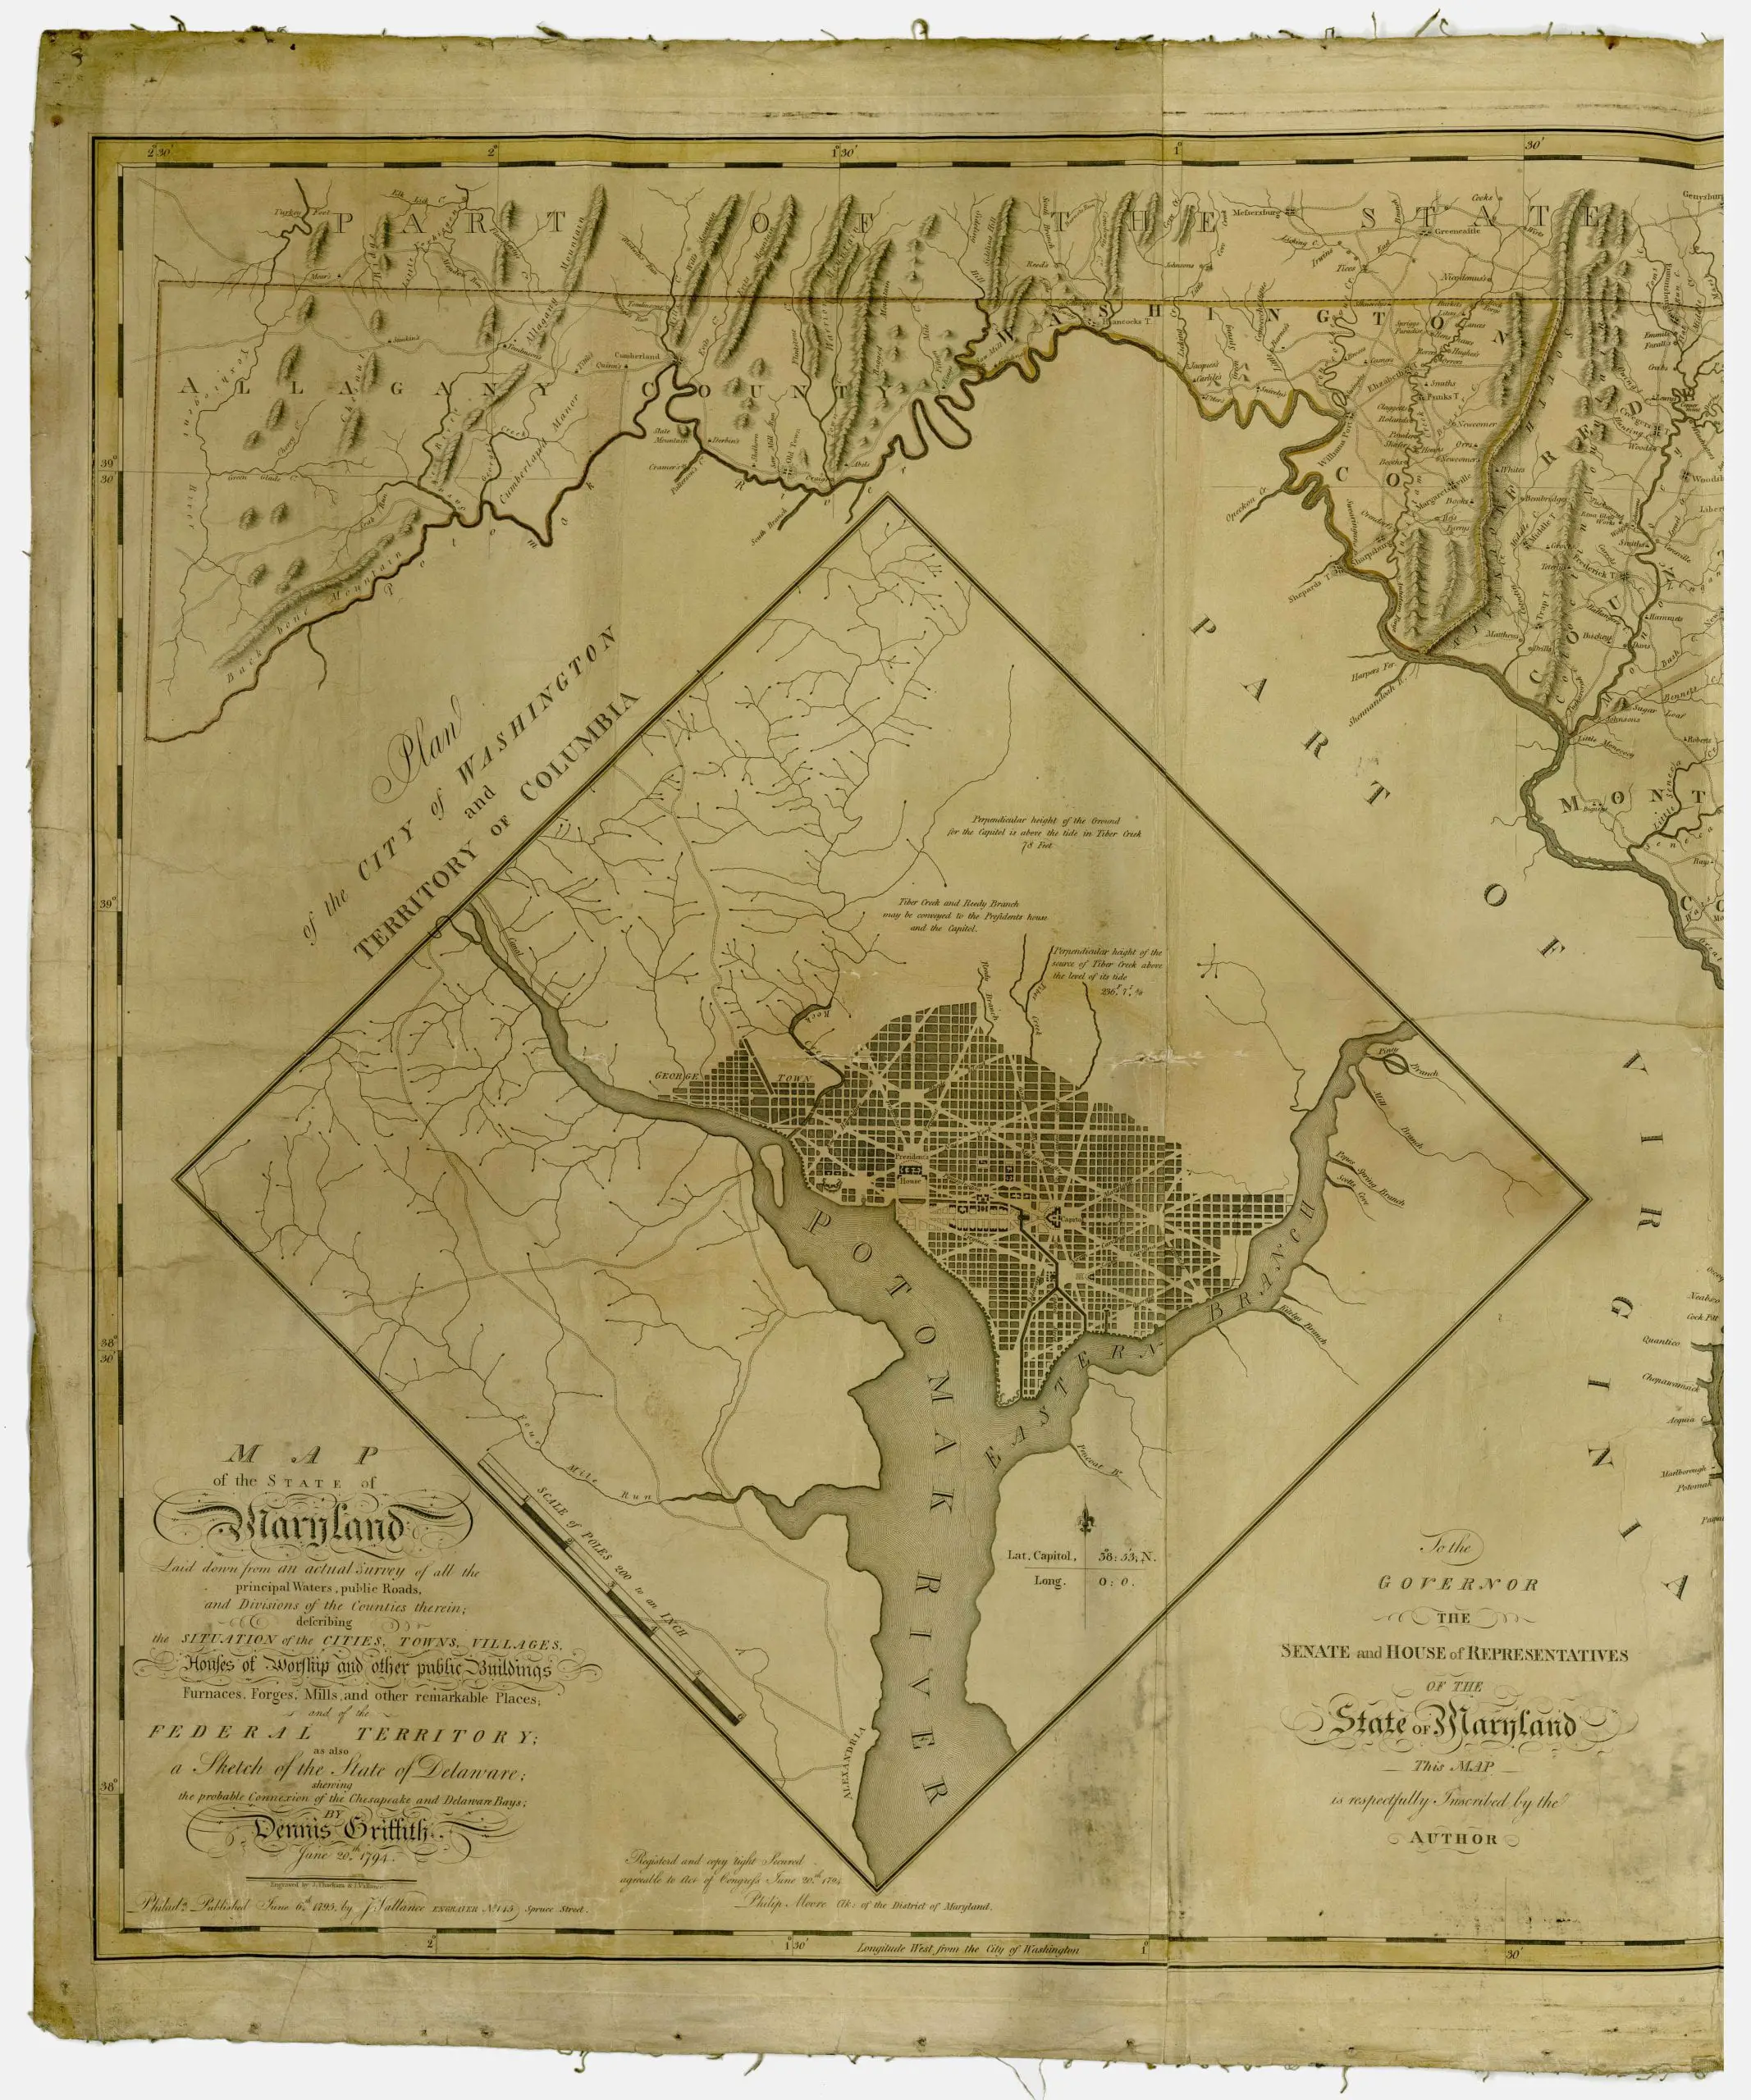 Description Map of the State of Maryland, laid down from an actual survey of all the principal waters, public roads, and divisions of the counties therein, describing the situation of the cities, towns, villages, houses of worship and other public buildings, furnaces, forges, mills, and other remarkable places, and of the Federal Territory, as also a sketch of the State of Delaware shewing the probable connexion of the Chesapeake and Delaware Bays, June 20th, 1794. Relief shown pictorially; Hand colored; Engraved by J. Thackara & J. Vallance; Includes "Plan of the city of Washington and Territory of Columbia" and a dedication to the Governor, the Senate and House of Representatives of the state of Maryland.